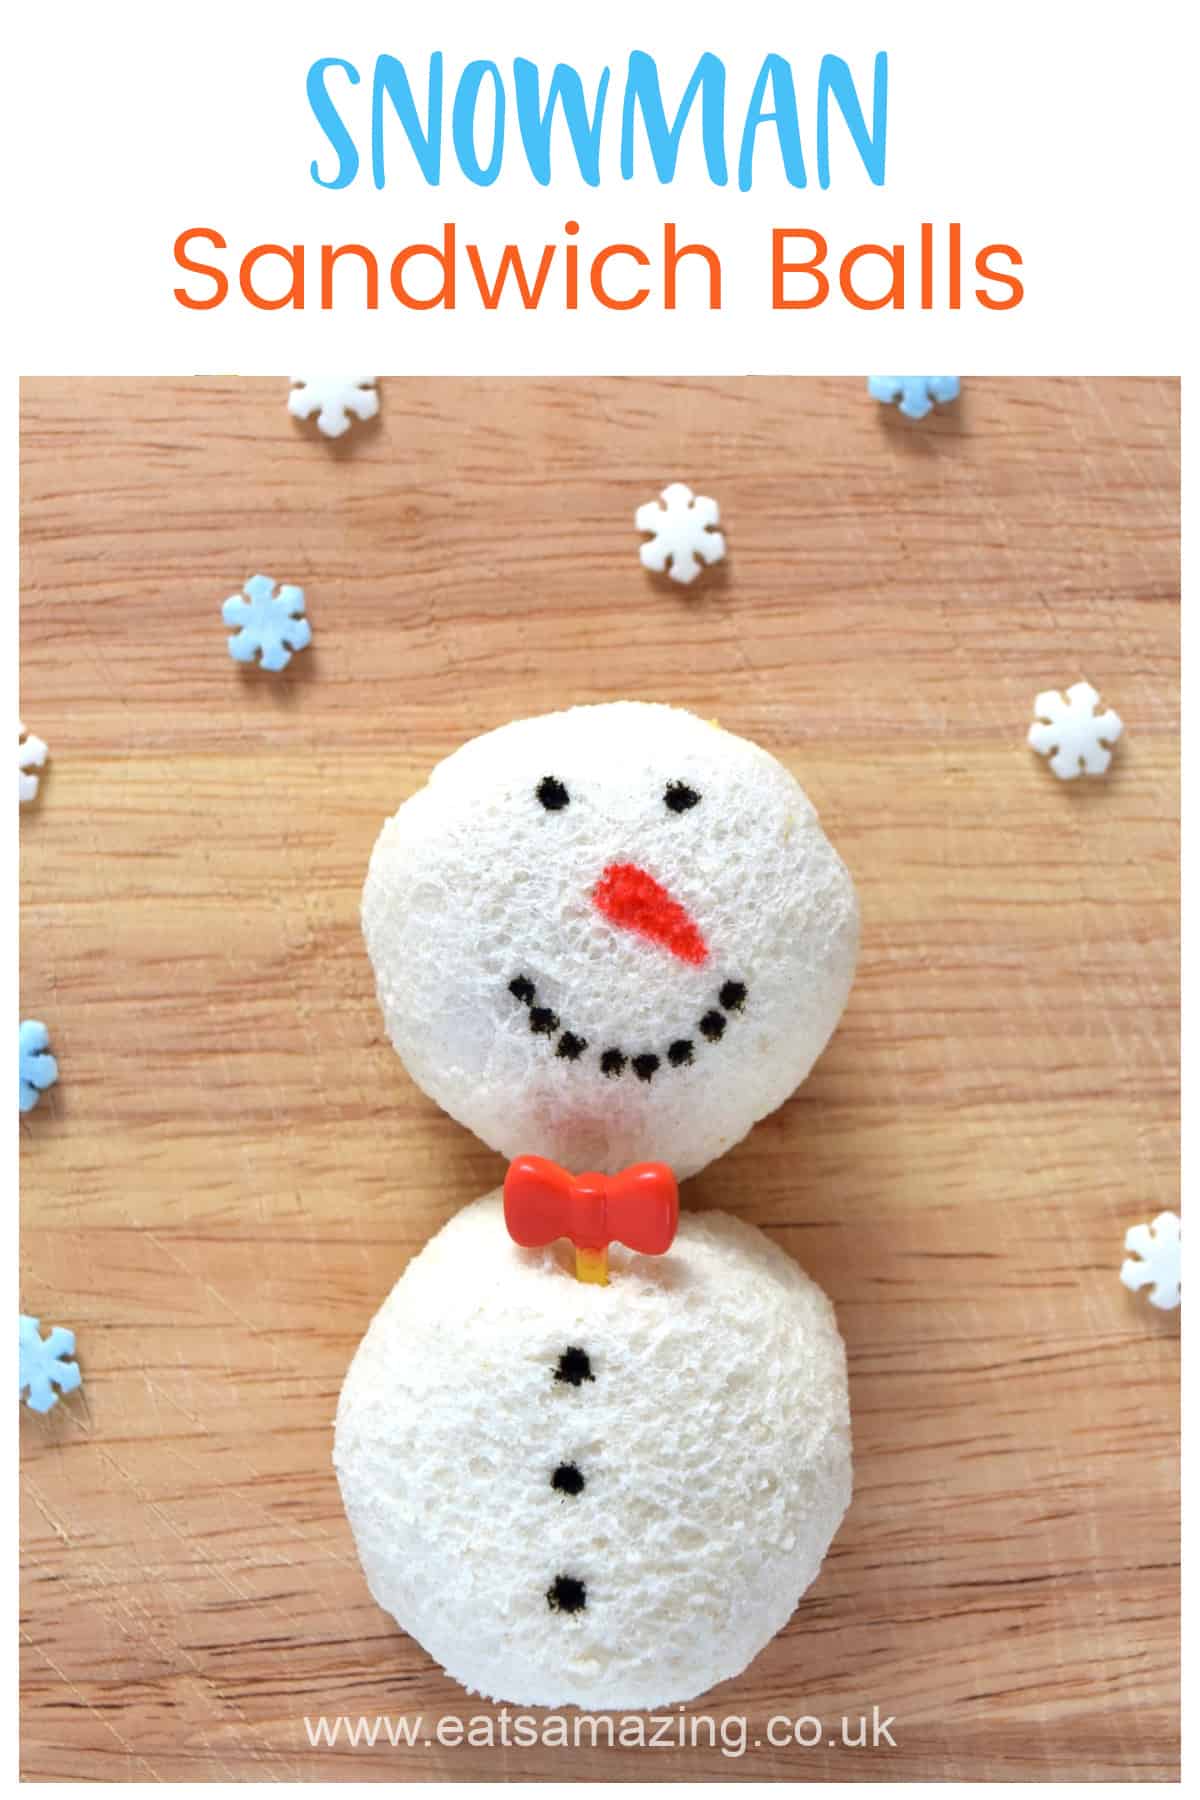 How to make easy snowman sandwich balls - fun Christmas party food idea or packed lunch for kids